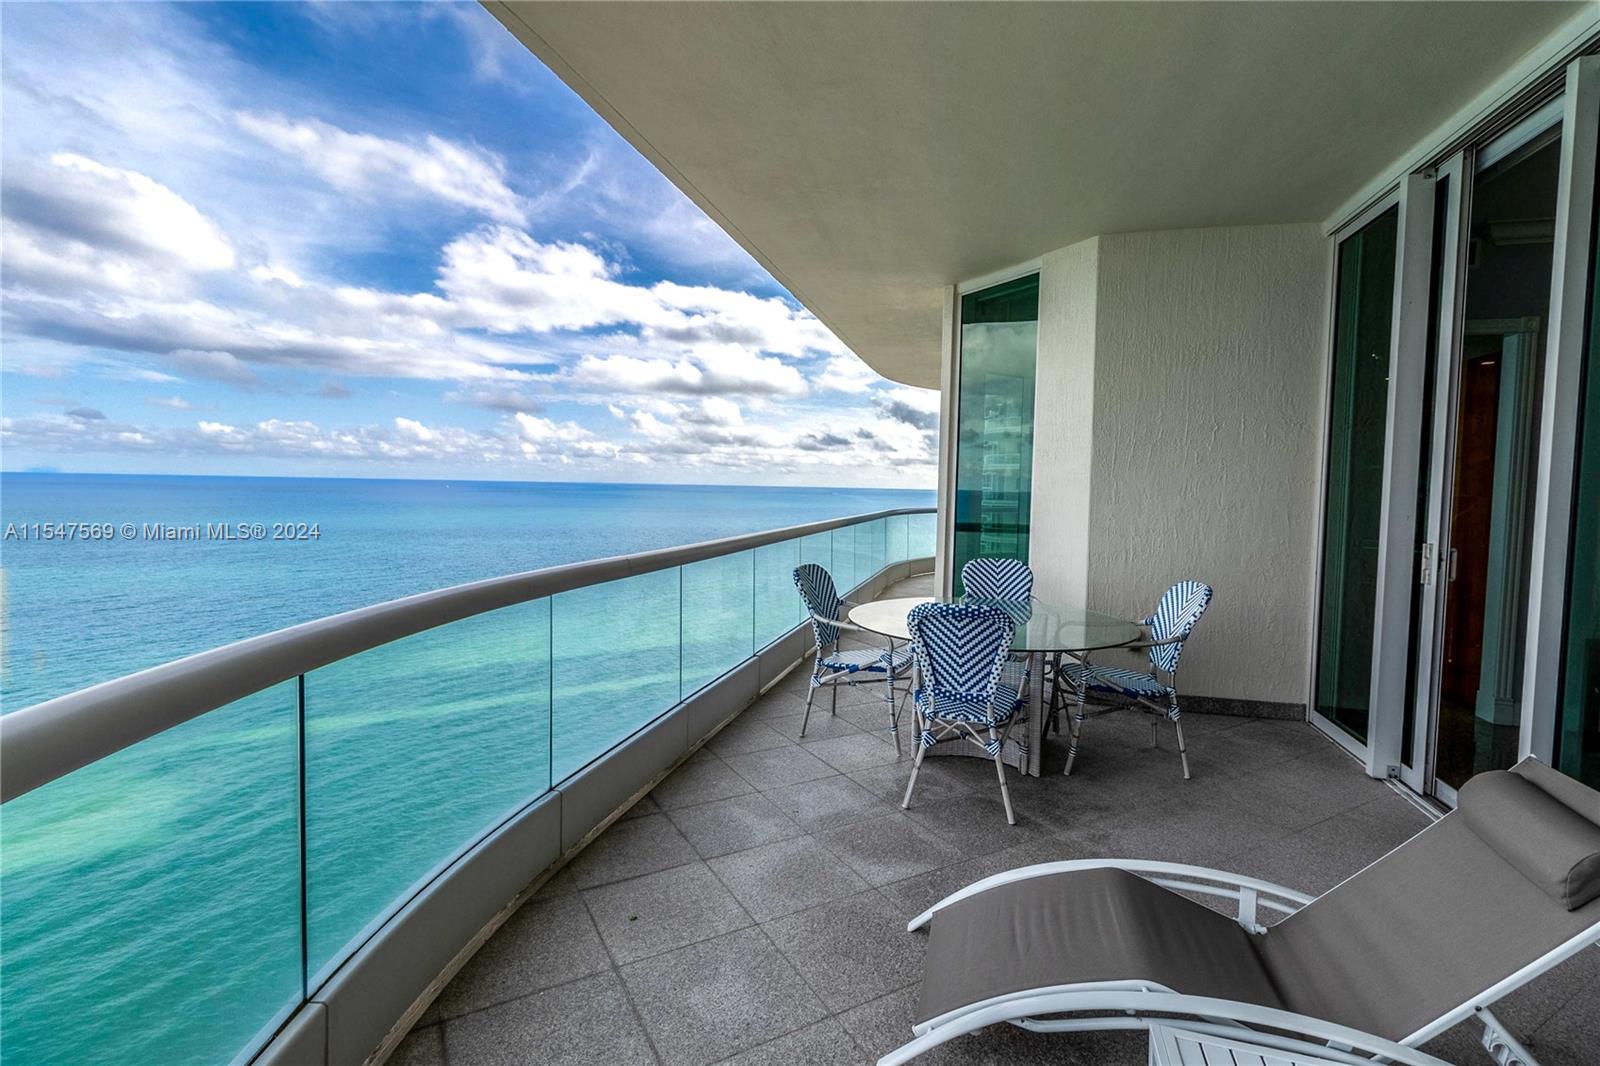 Experience luxury living in this highly sought after 2 Bedroom, 2.5 Baths residence in the prestigious Turnberry Ocean Colony. Featuring breathtaking, unobstructed views of the ocean from floor-to-ceiling windows. This elegant residence features marble floors, 10-ft ceilings, a private foyer, an Italian kitchen and top-of-the-line Gaggenau and Sub-Zero appliances, freshly painted, brand new light fixtures, furniture and electric window treatments throughout. Residents will enjoy the exclusive amenities, including direct beach access, two restaurants, a bar, a well-equipped gym, a brand new spa, a kids' game room, and more. This is an unparalleled opportunity to immerse yourself in the opulence of Turnberry Ocean Colony and savor the ultimate beachfront living experience.